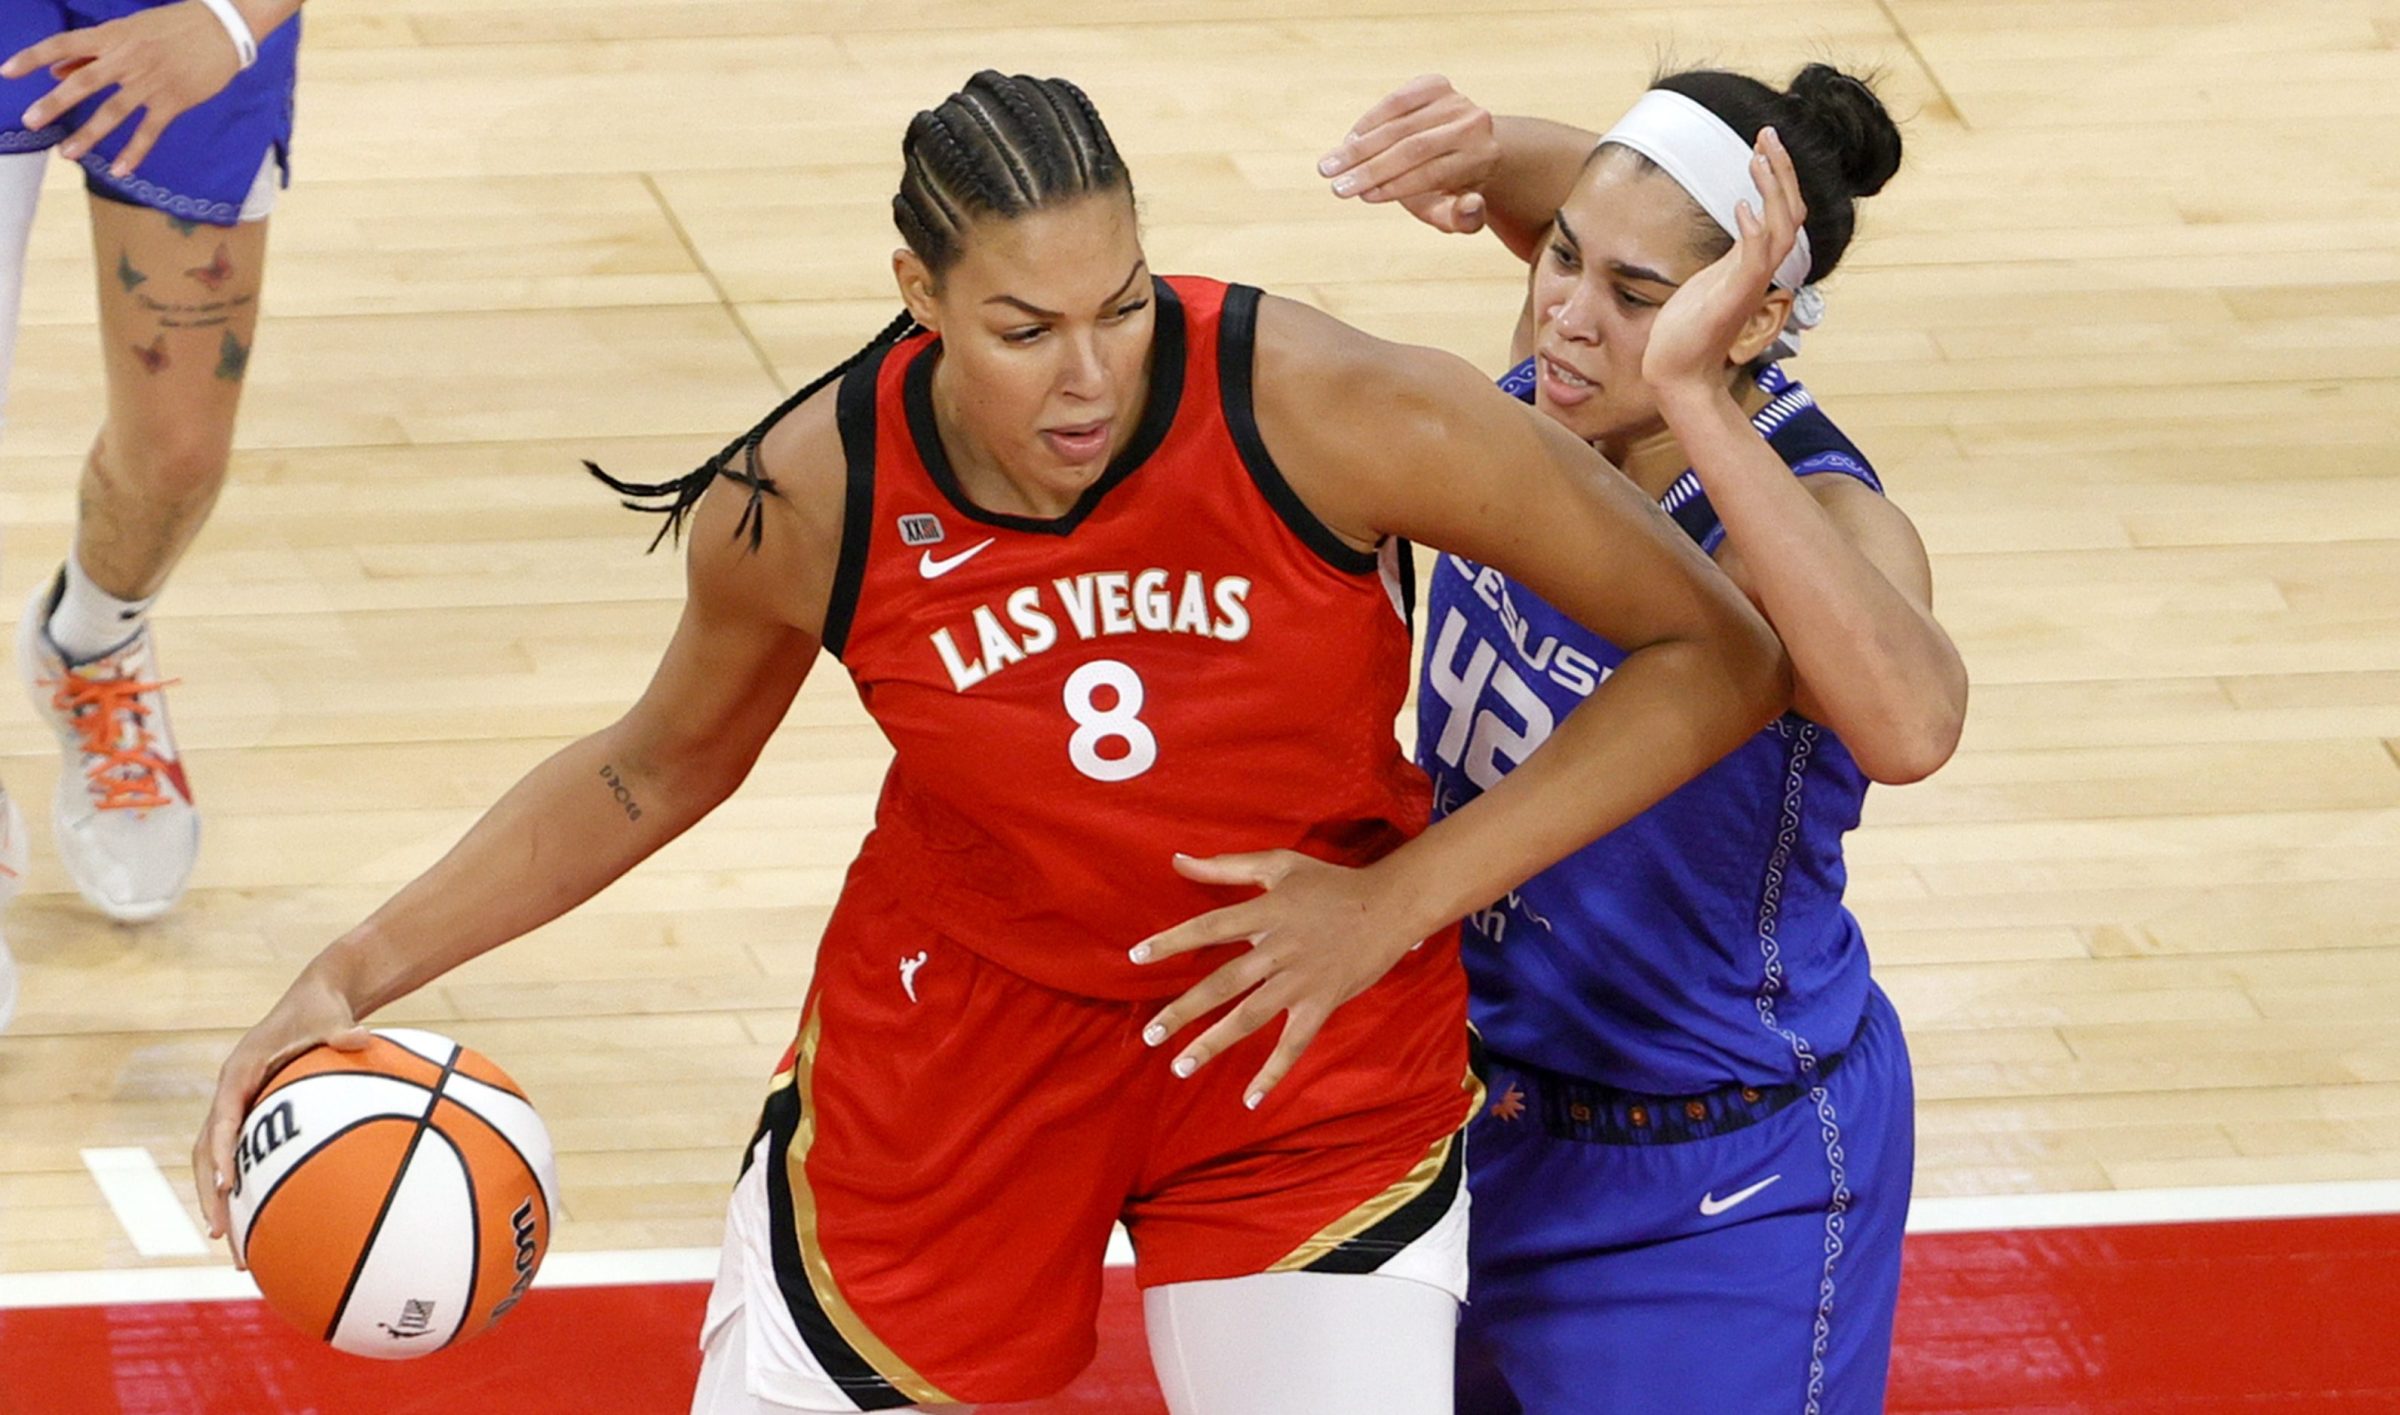 Liz Cambage #8 of the Las Vegas Aces is guarded by Brionna Jones #42 of the Connecticut Sun during their game at Michelob ULTRA Arena on May 23, 2021 in Las Vegas, Nevada. The Sun defeated the Aces 72-65.